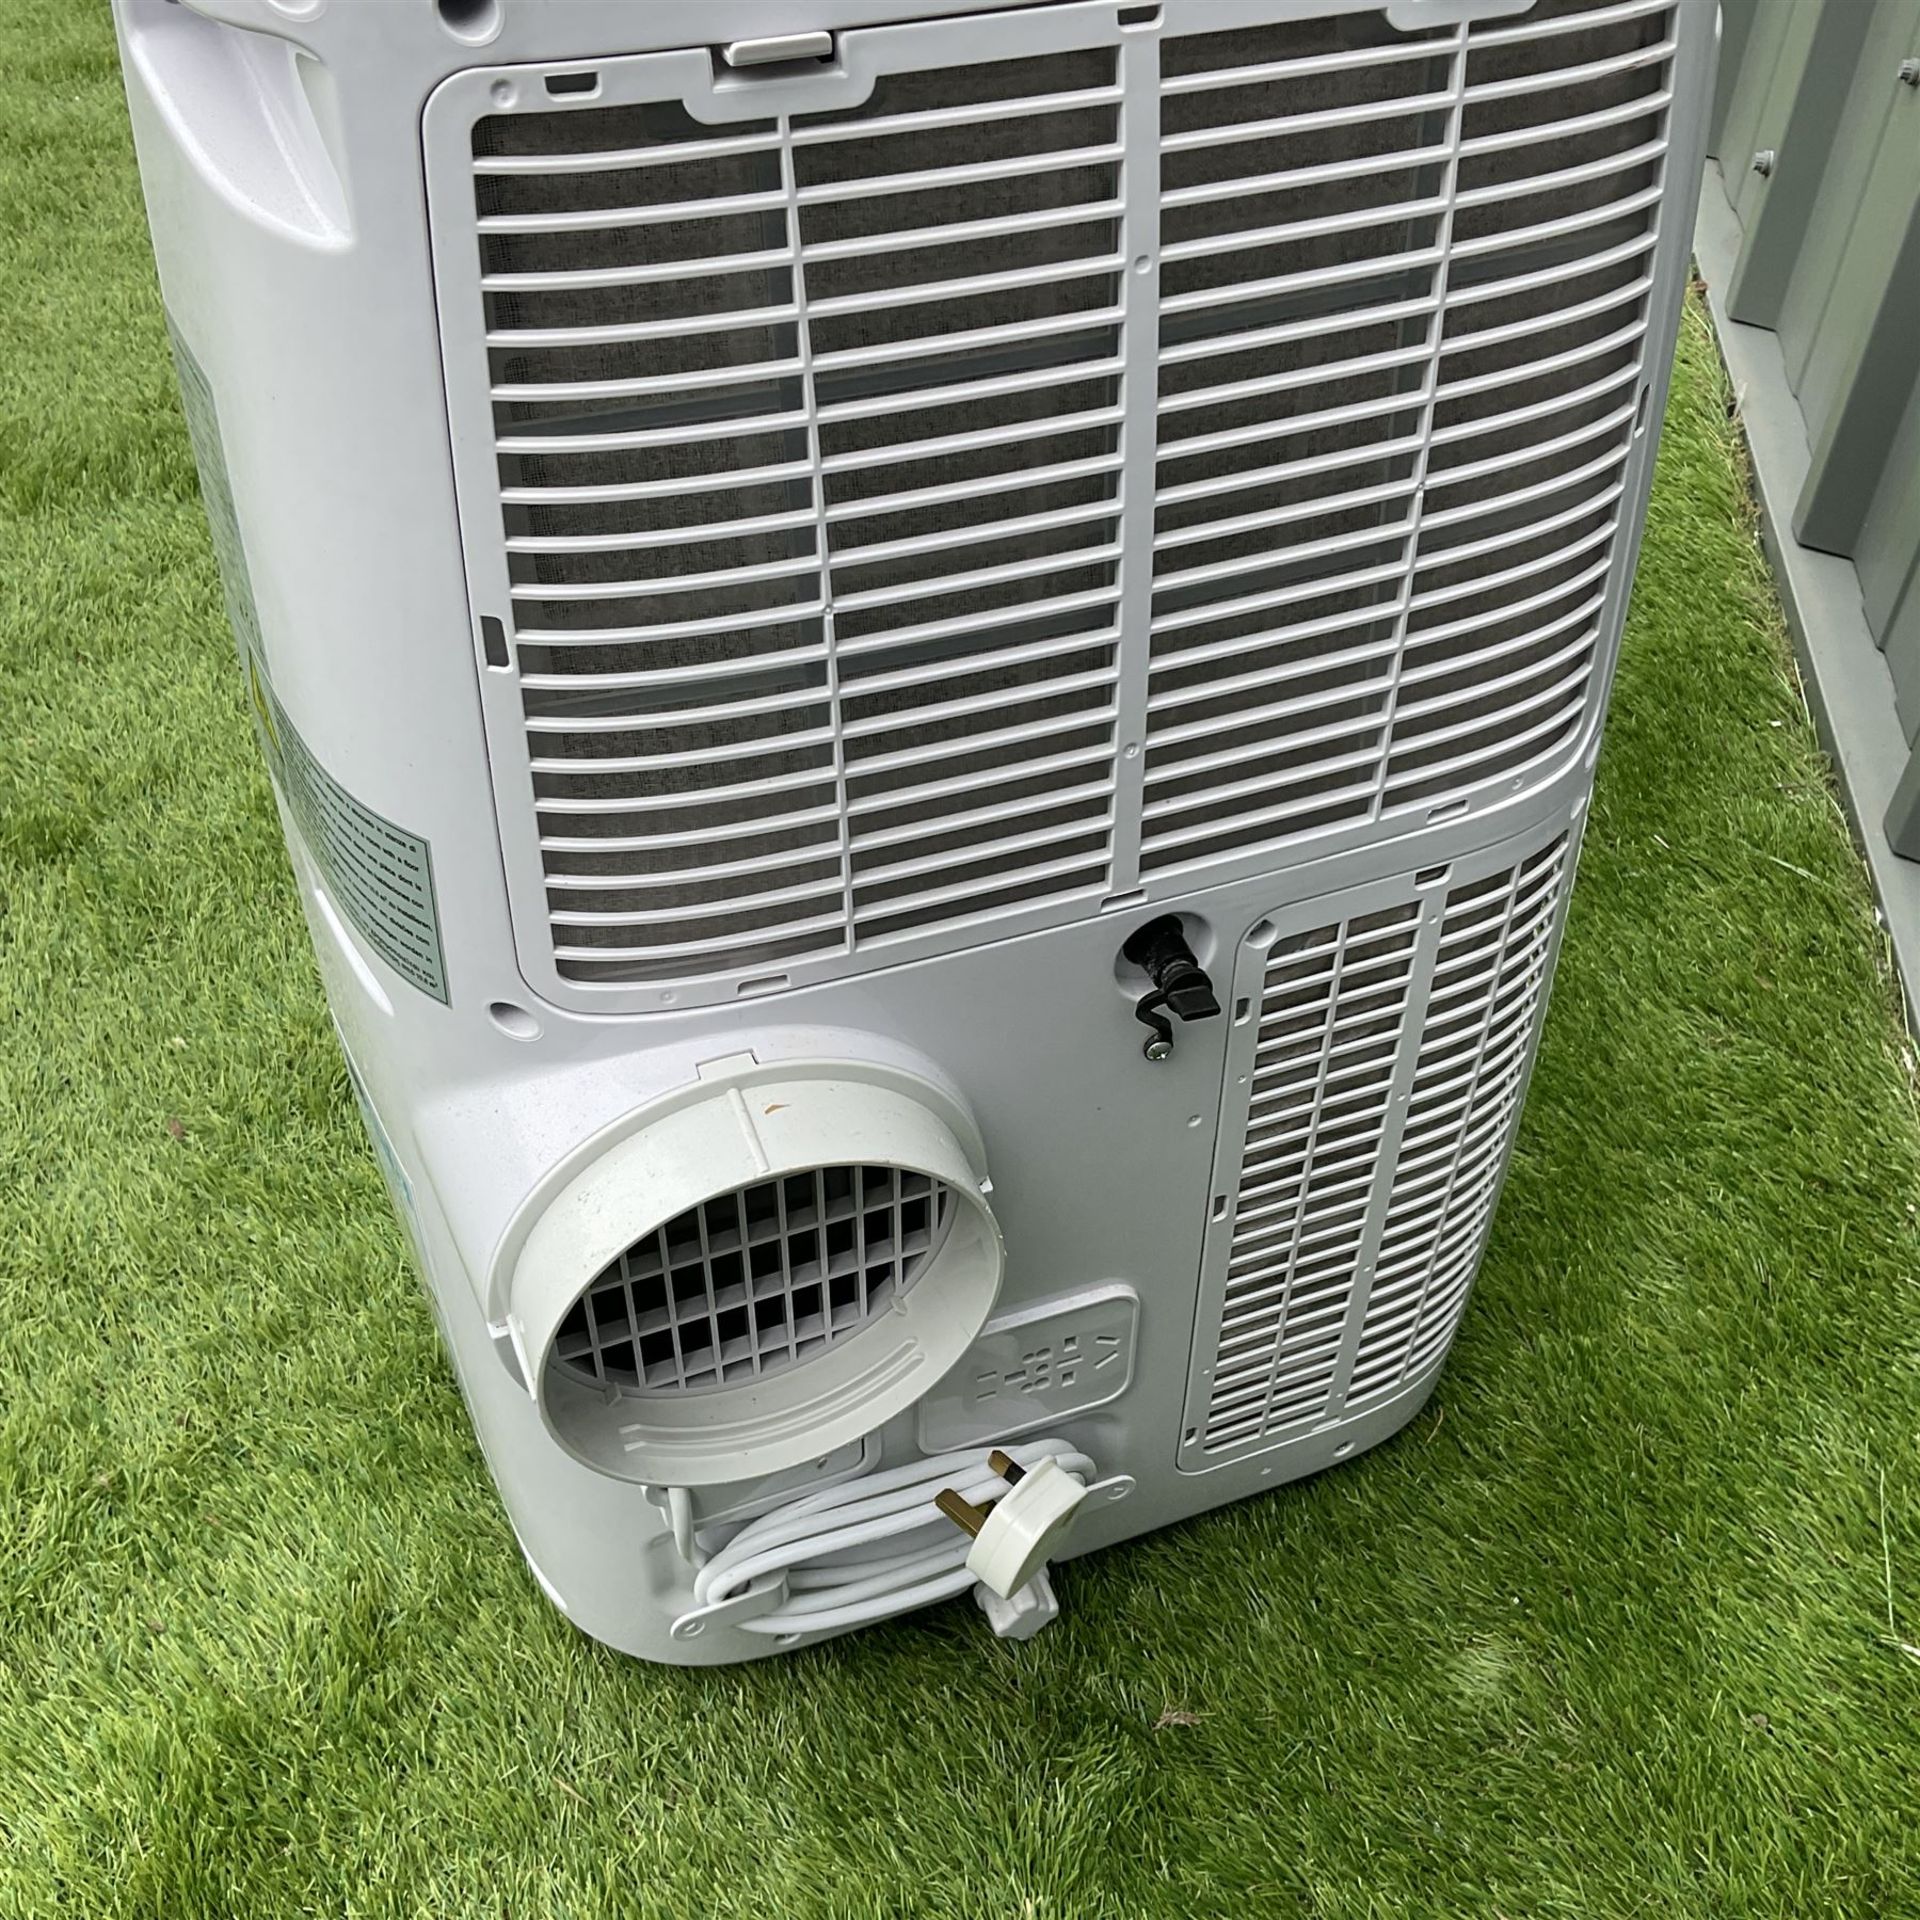 Climachill PAC15J air conditioning unit - Image 4 of 4